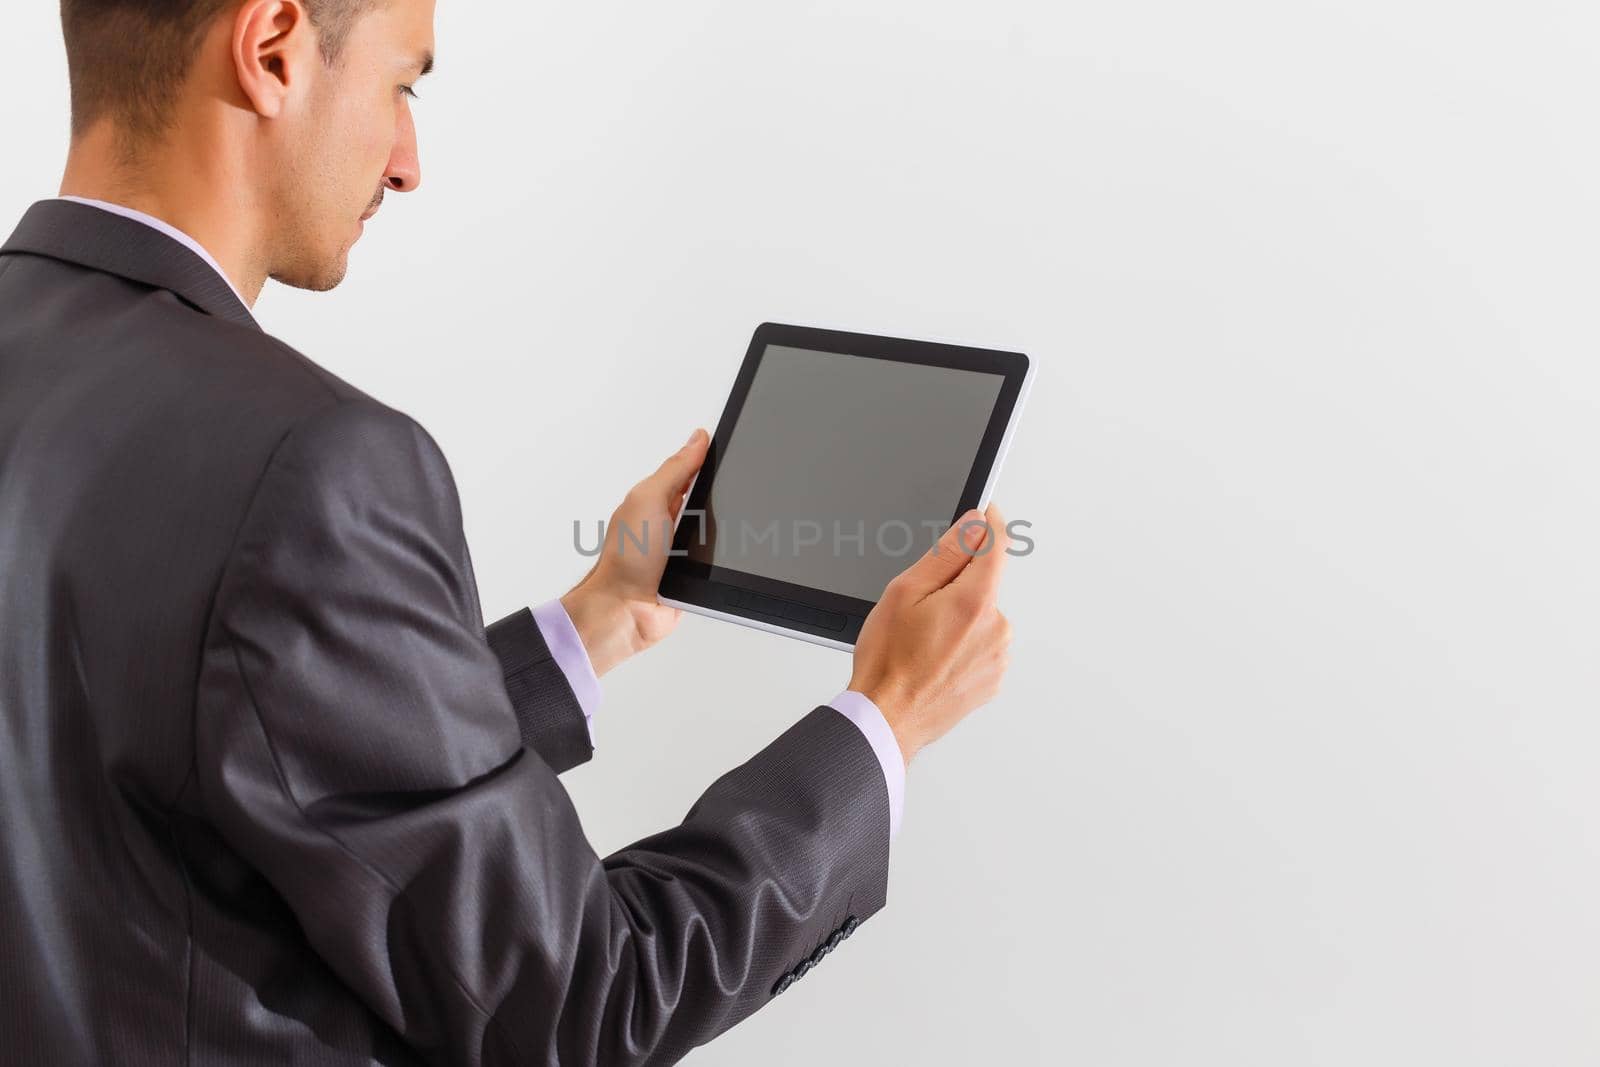 The businessman holding tablet against white background